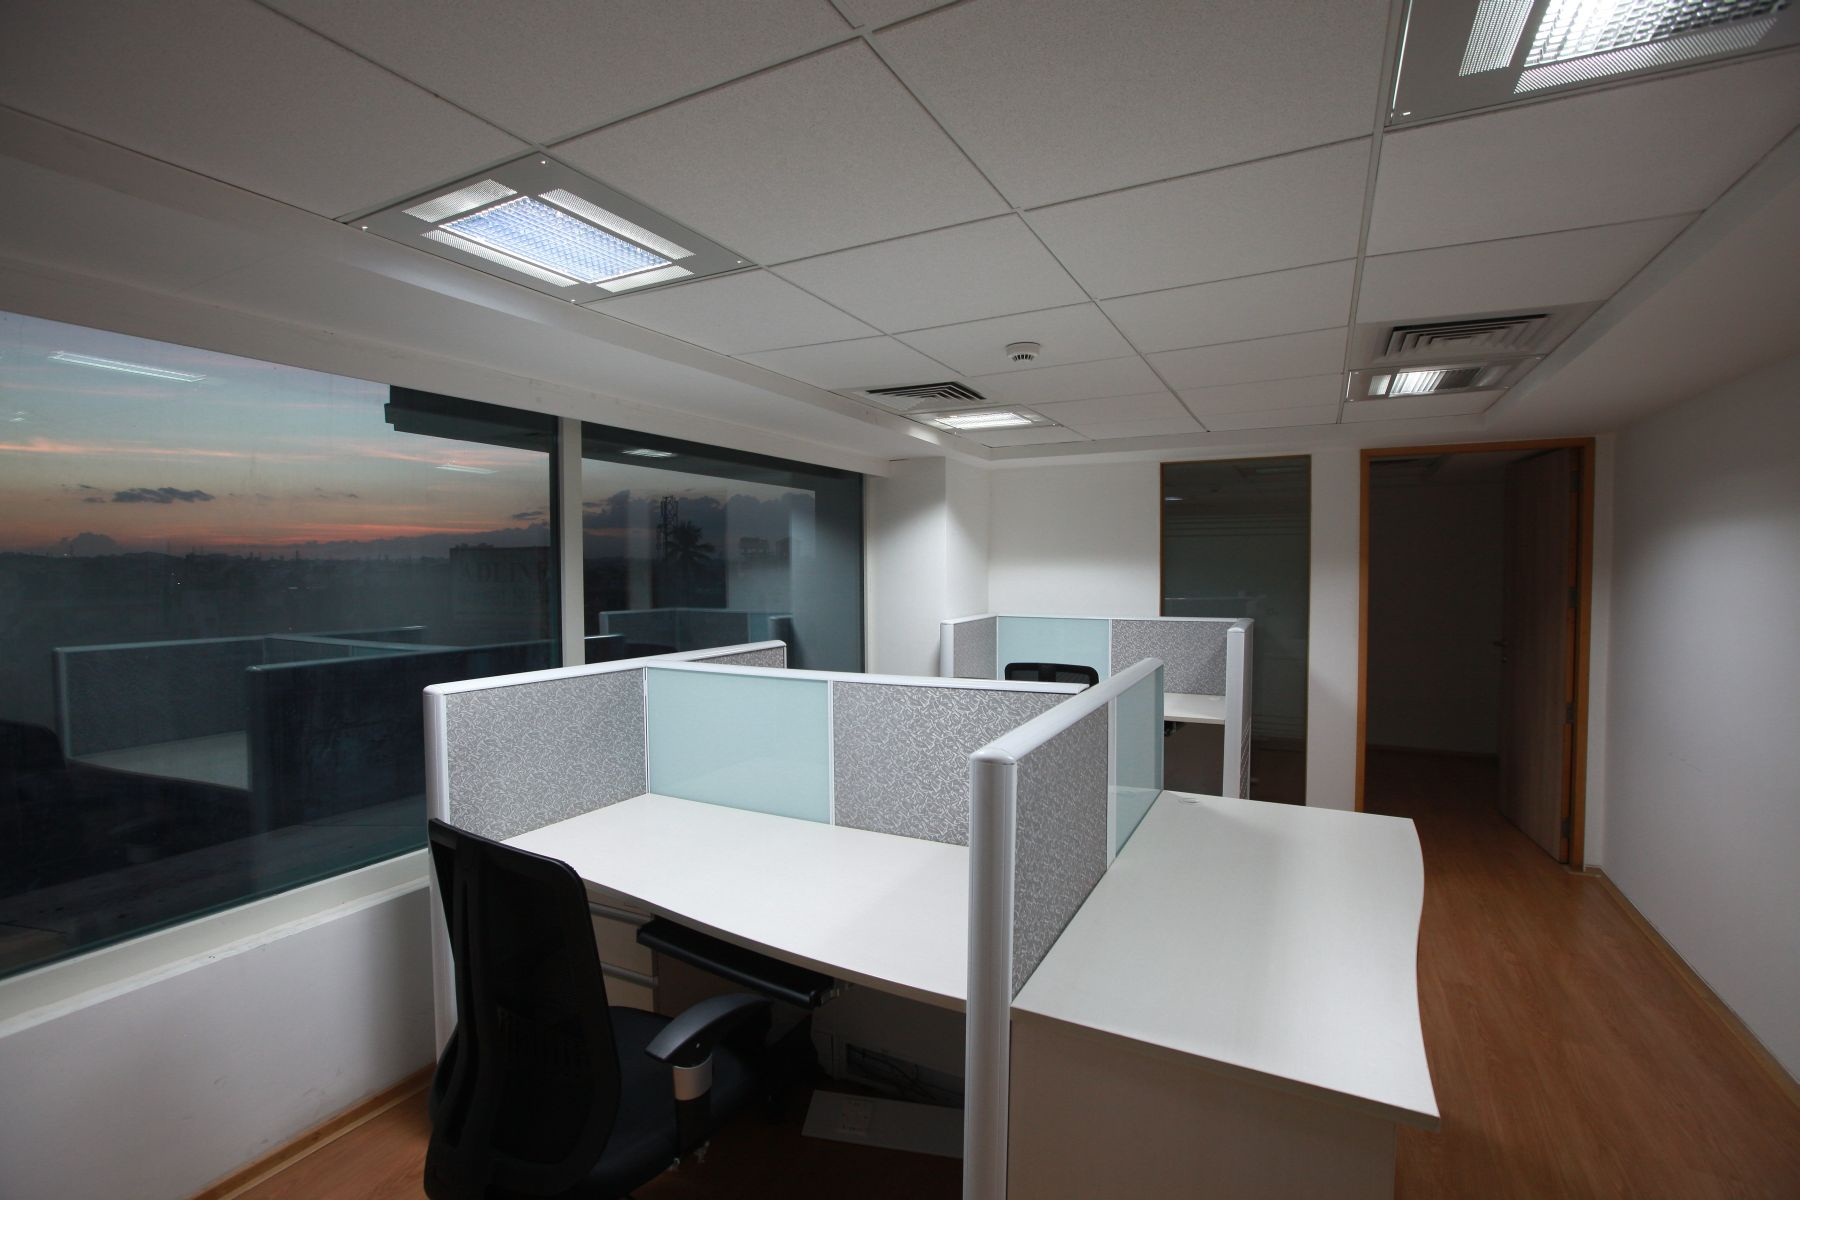 Cubicles starting price 10 000 and cabin 20 000 onwards with the flexibility for expansion